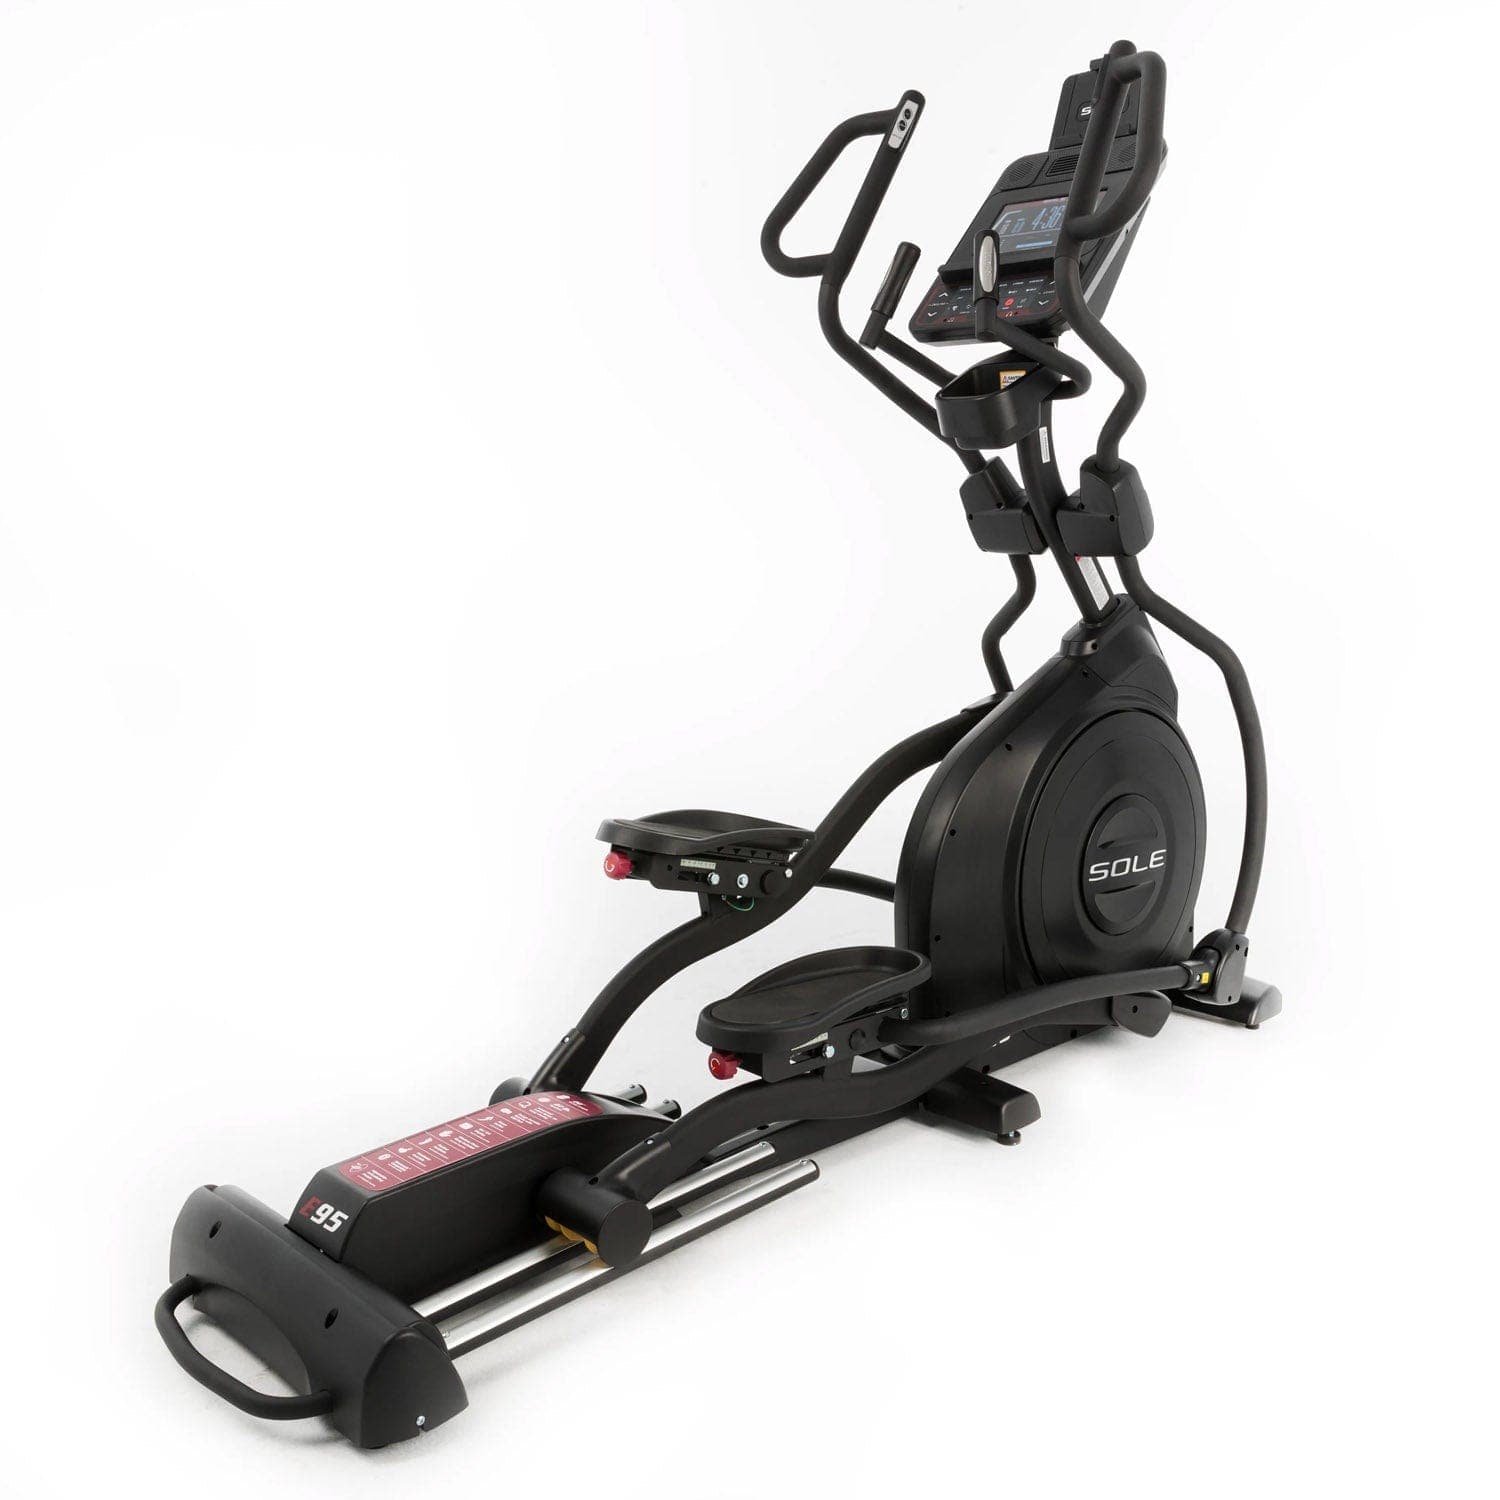 ARGT Sole Fitness E95 Home Use Elliptical Trainer